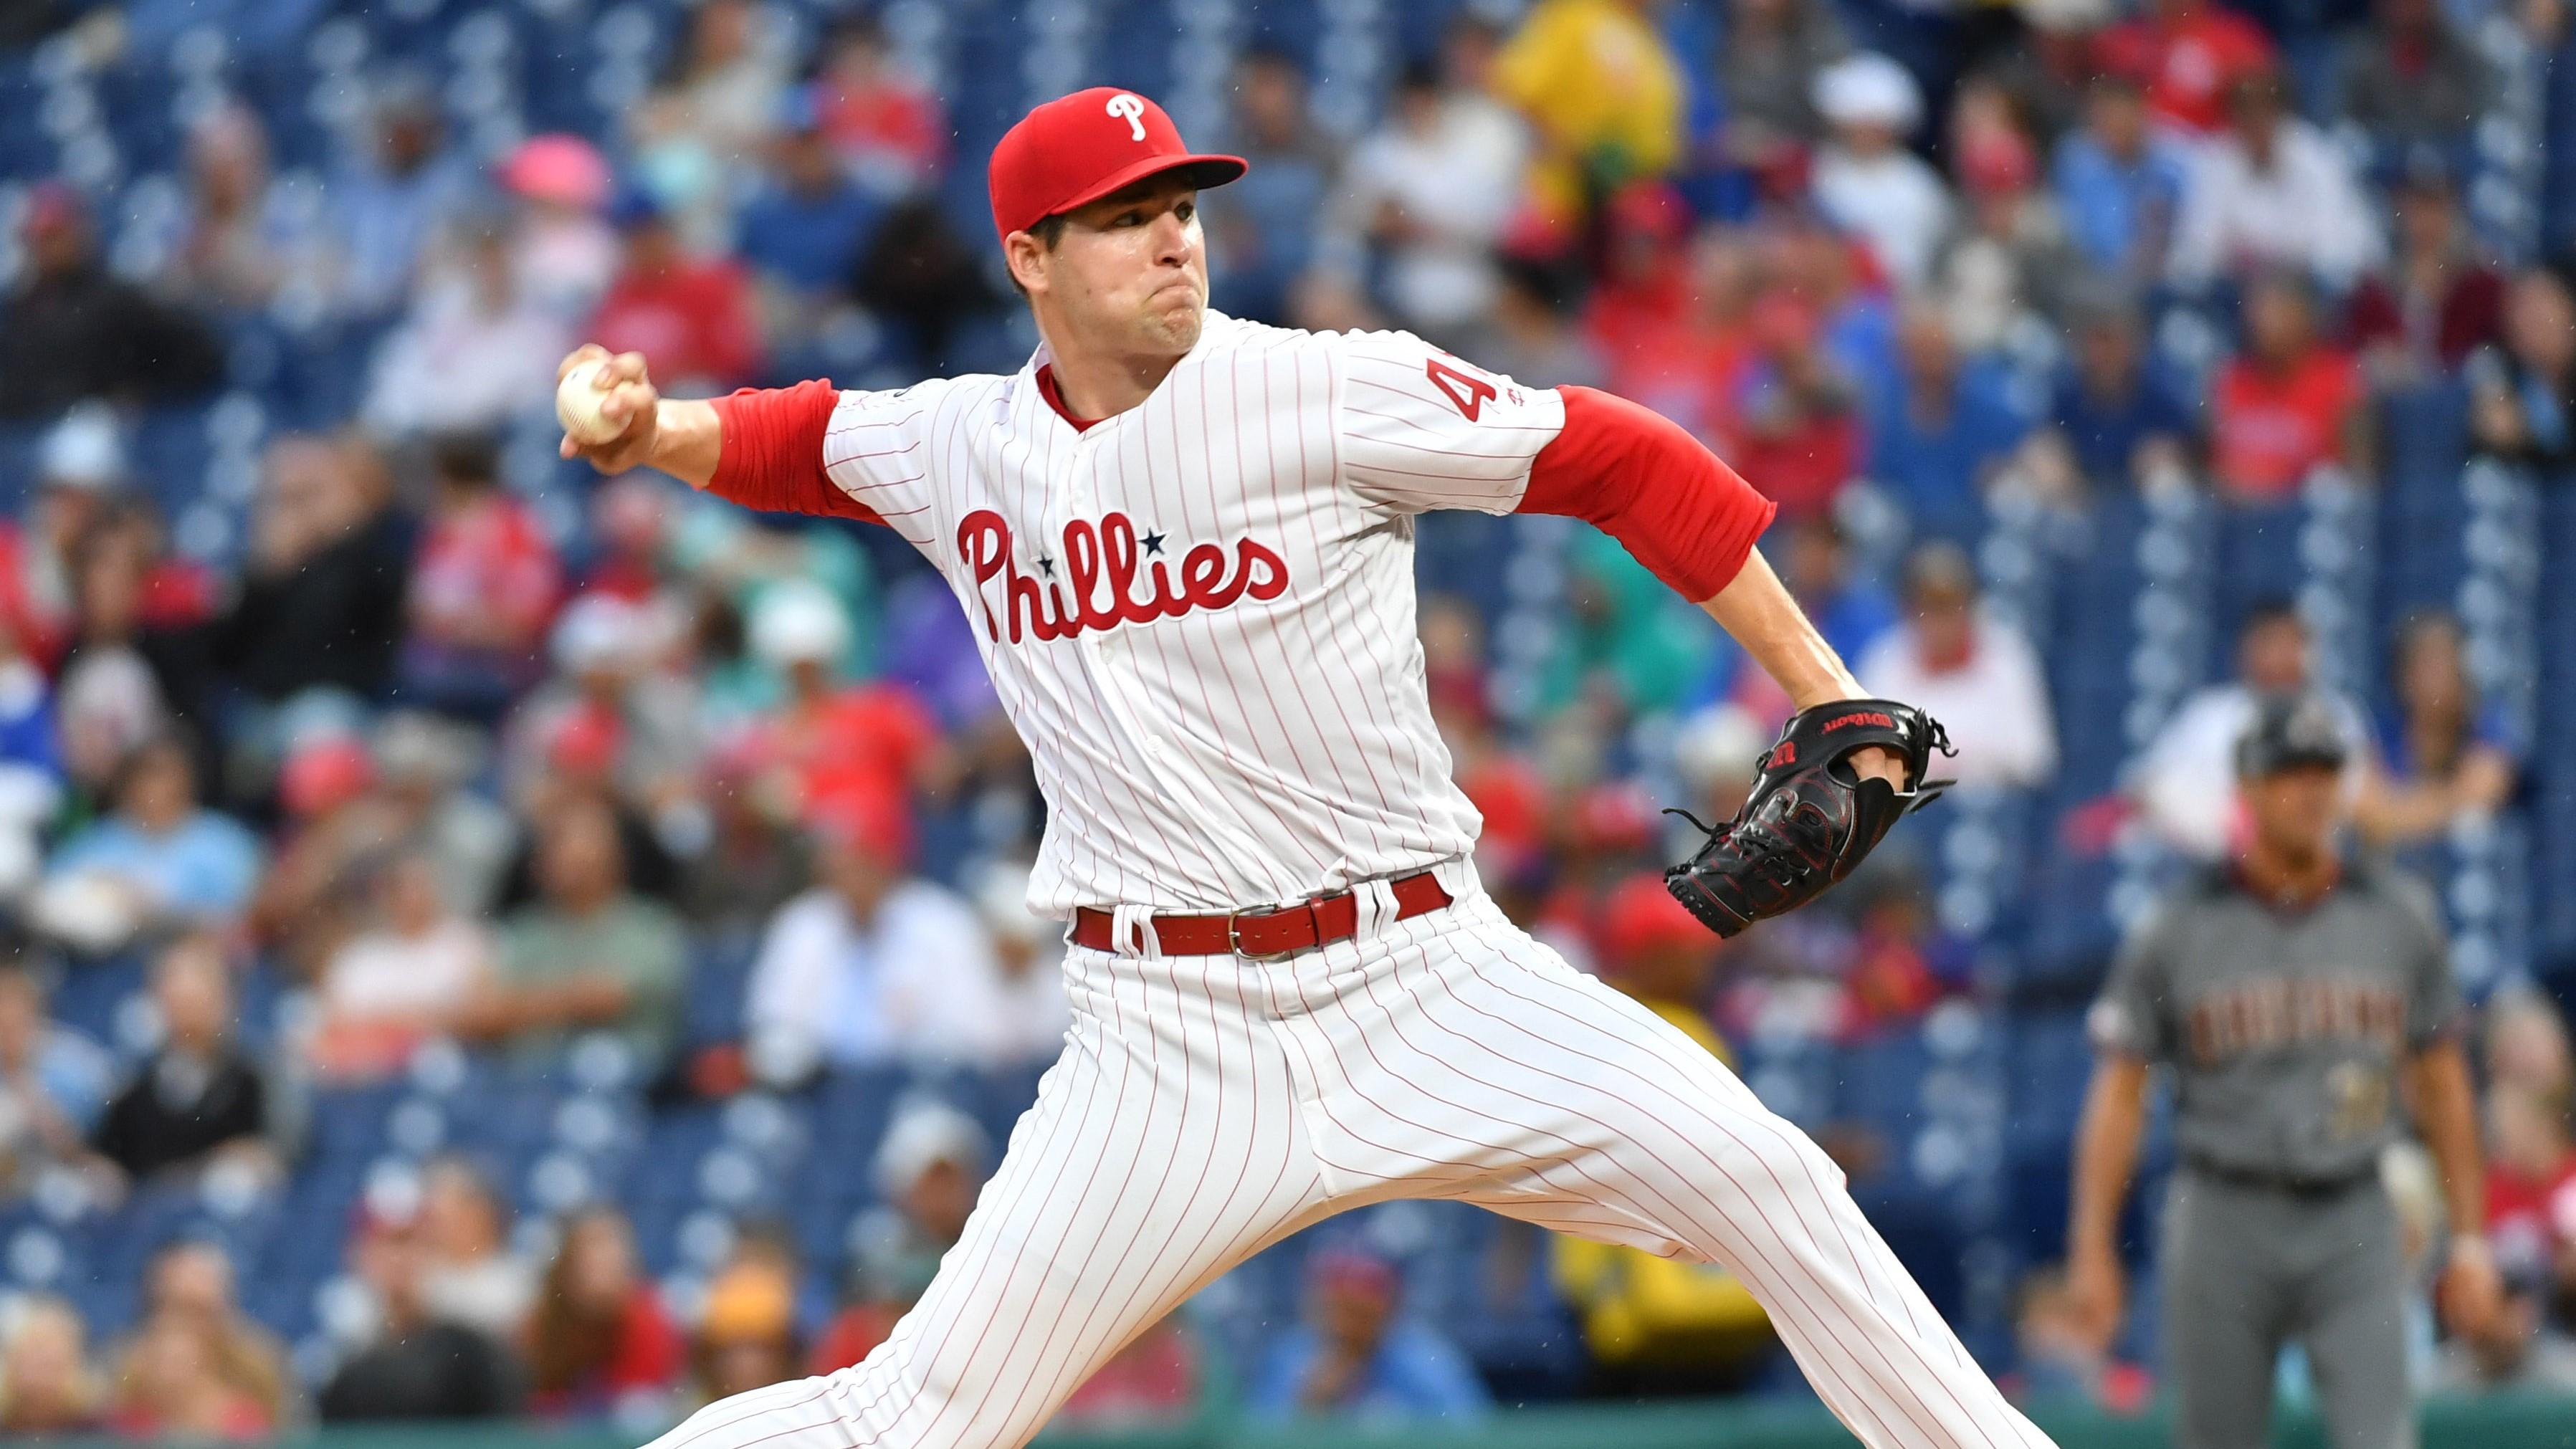 Philadelphia Phillies starting pitcher Jerad Eickhoff (48) throws a pitch during the first inning against the Arizona Diamondbacks at Citizens Bank Park. / Eric Hartline